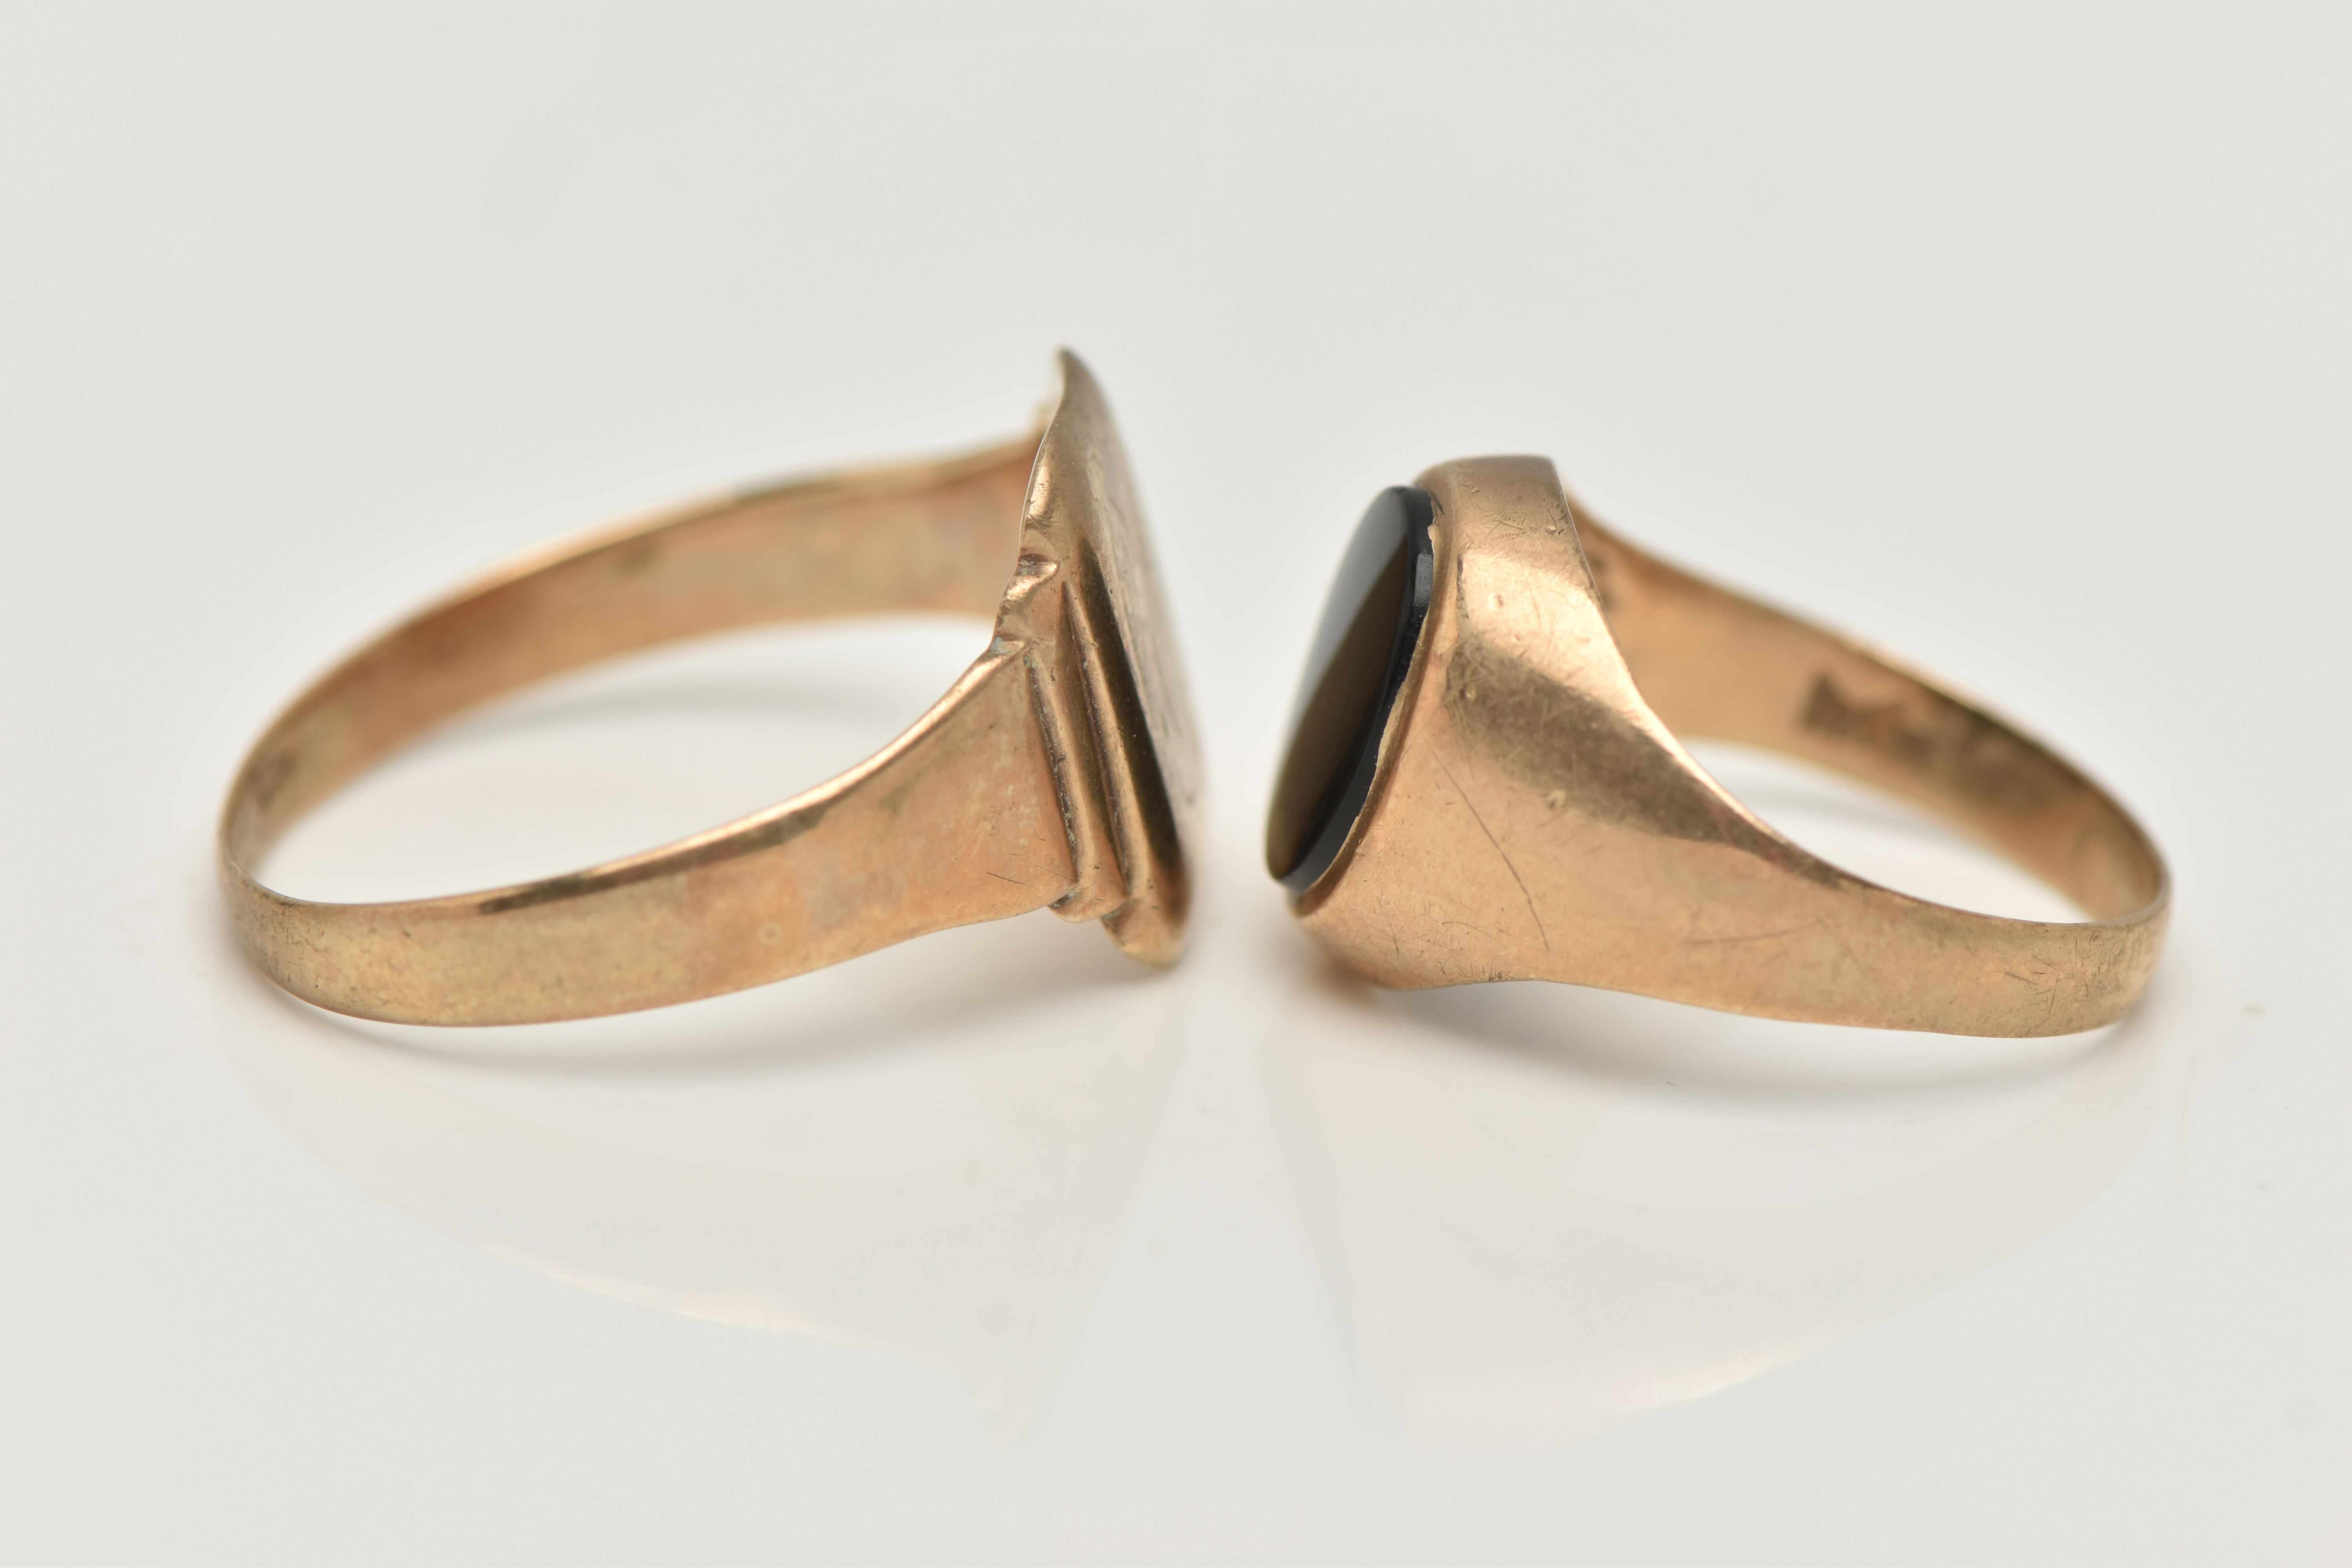 TWO SIGNET RINGS, the first a 9ct gold ring with central oval onyx panel, 9ct hallmark, ring size K, - Image 3 of 4